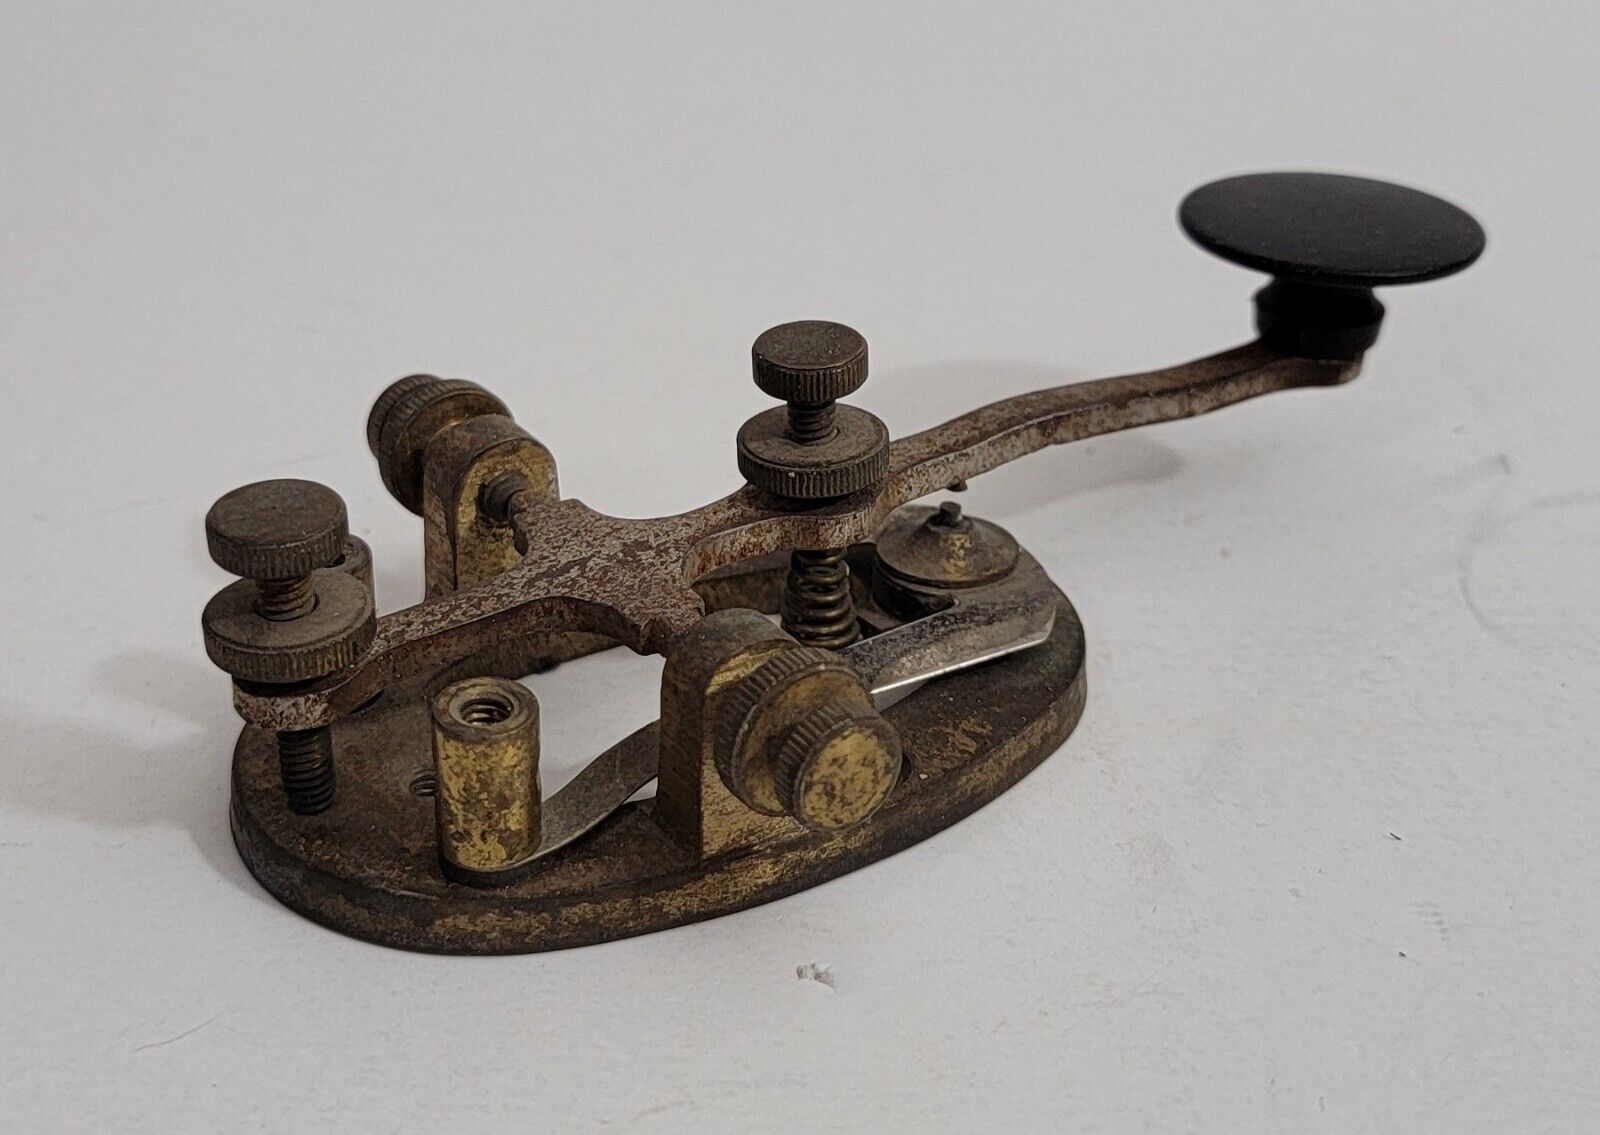 Antique Telegraph Key Morse Code Collectible Military Communication Tool